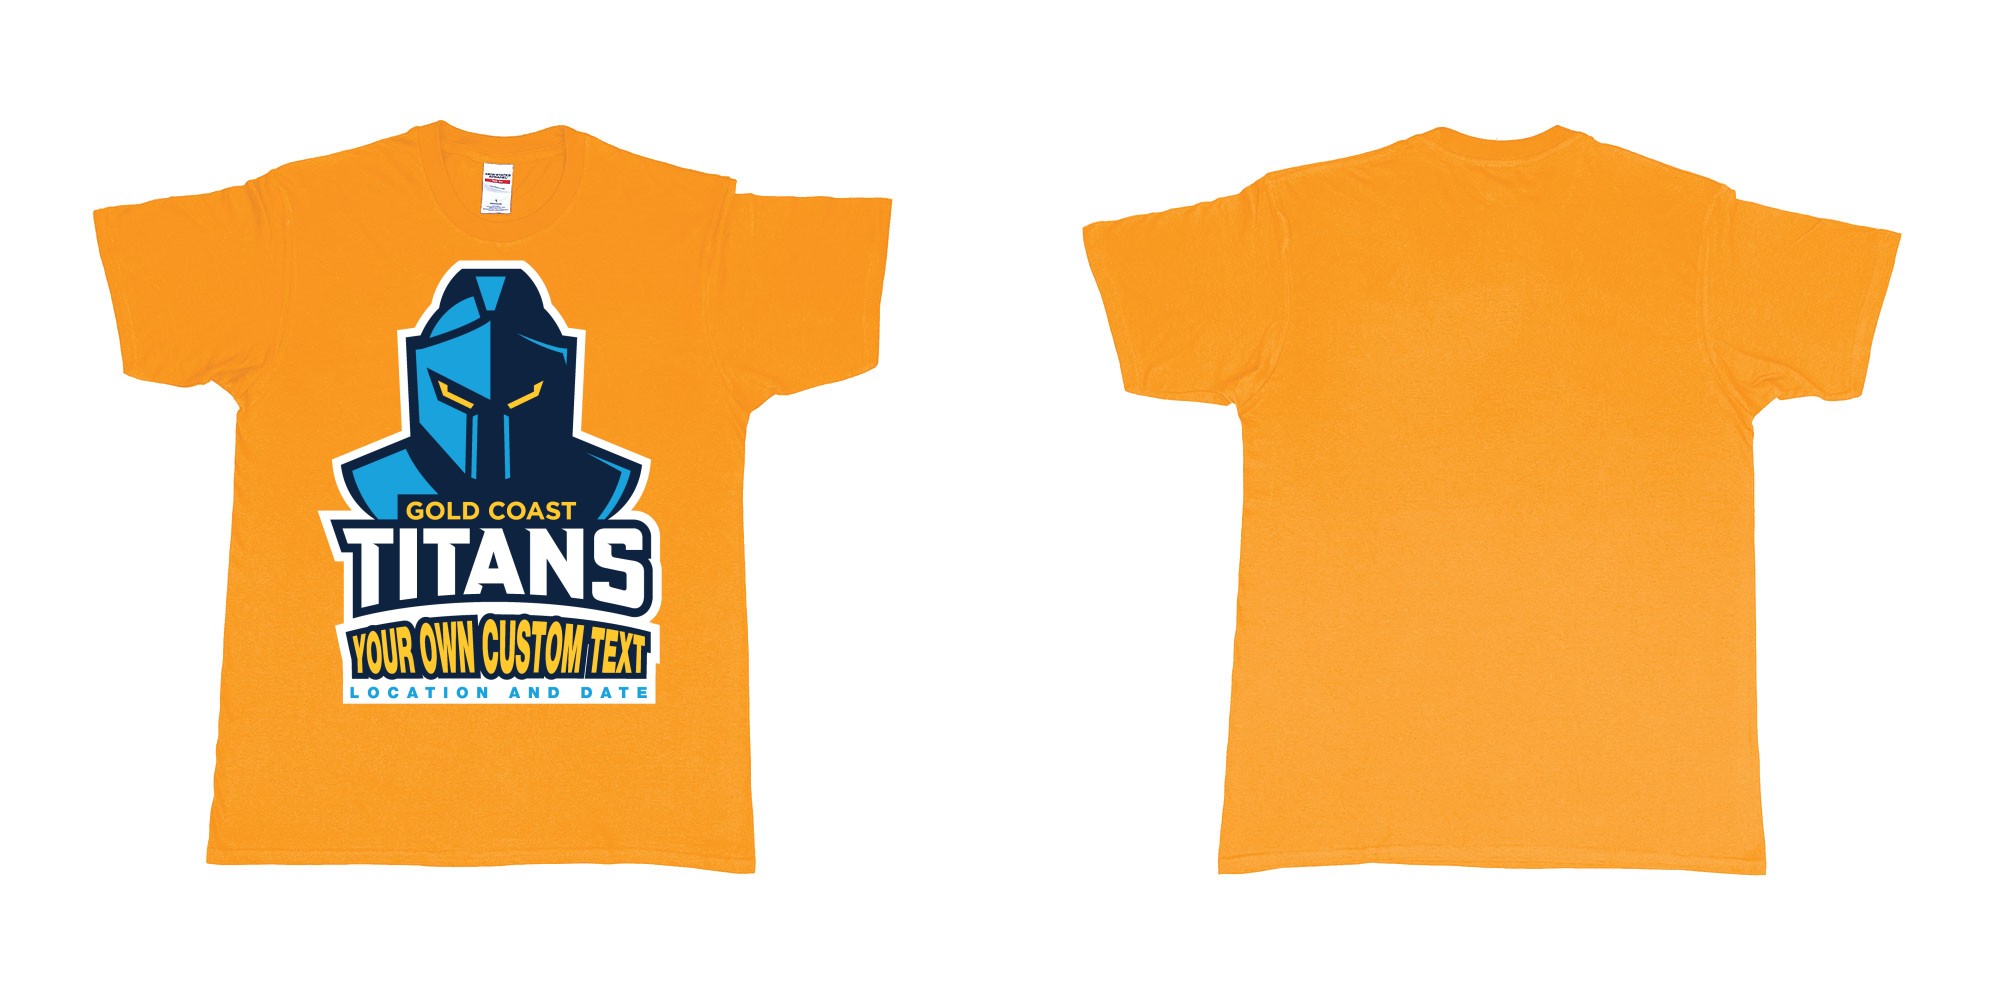 Custom tshirt design gold coast titans own custom design print in fabric color gold choice your own text made in Bali by The Pirate Way